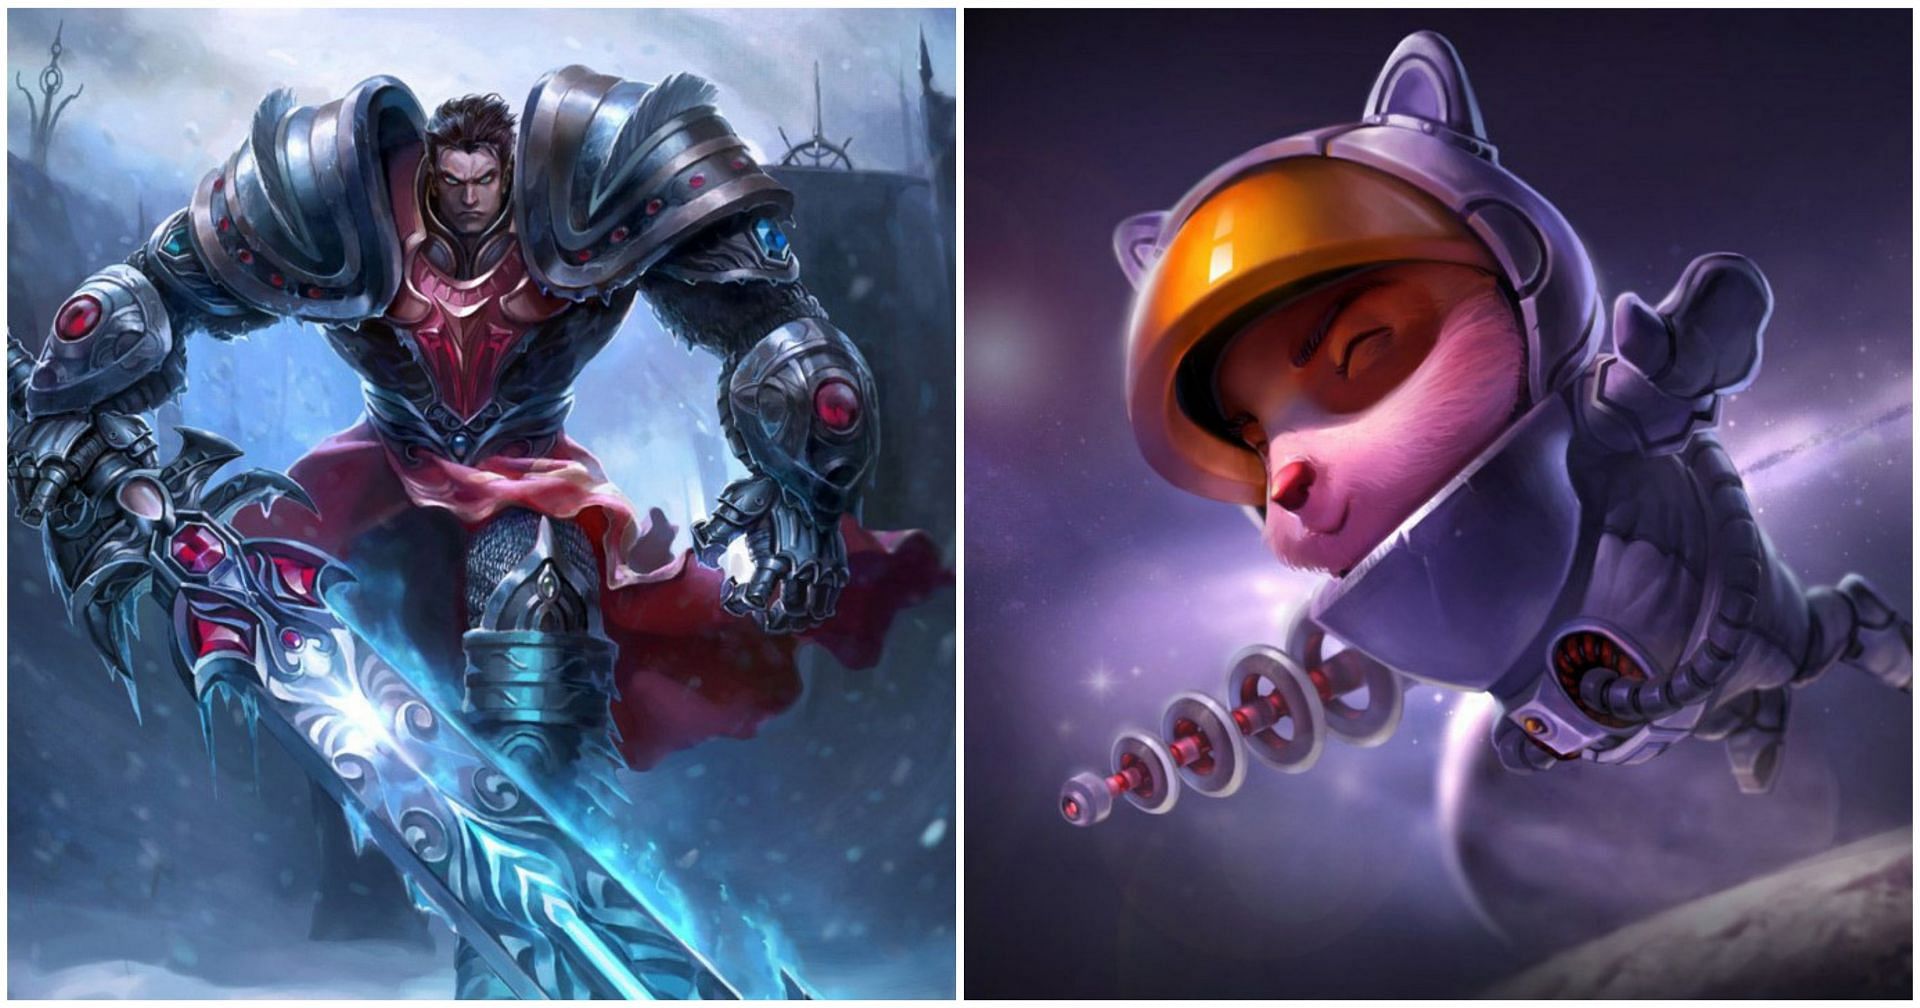 Garen and Teemo get their first lock-ins at League Worlds 2022 (Images vis Riot Games)